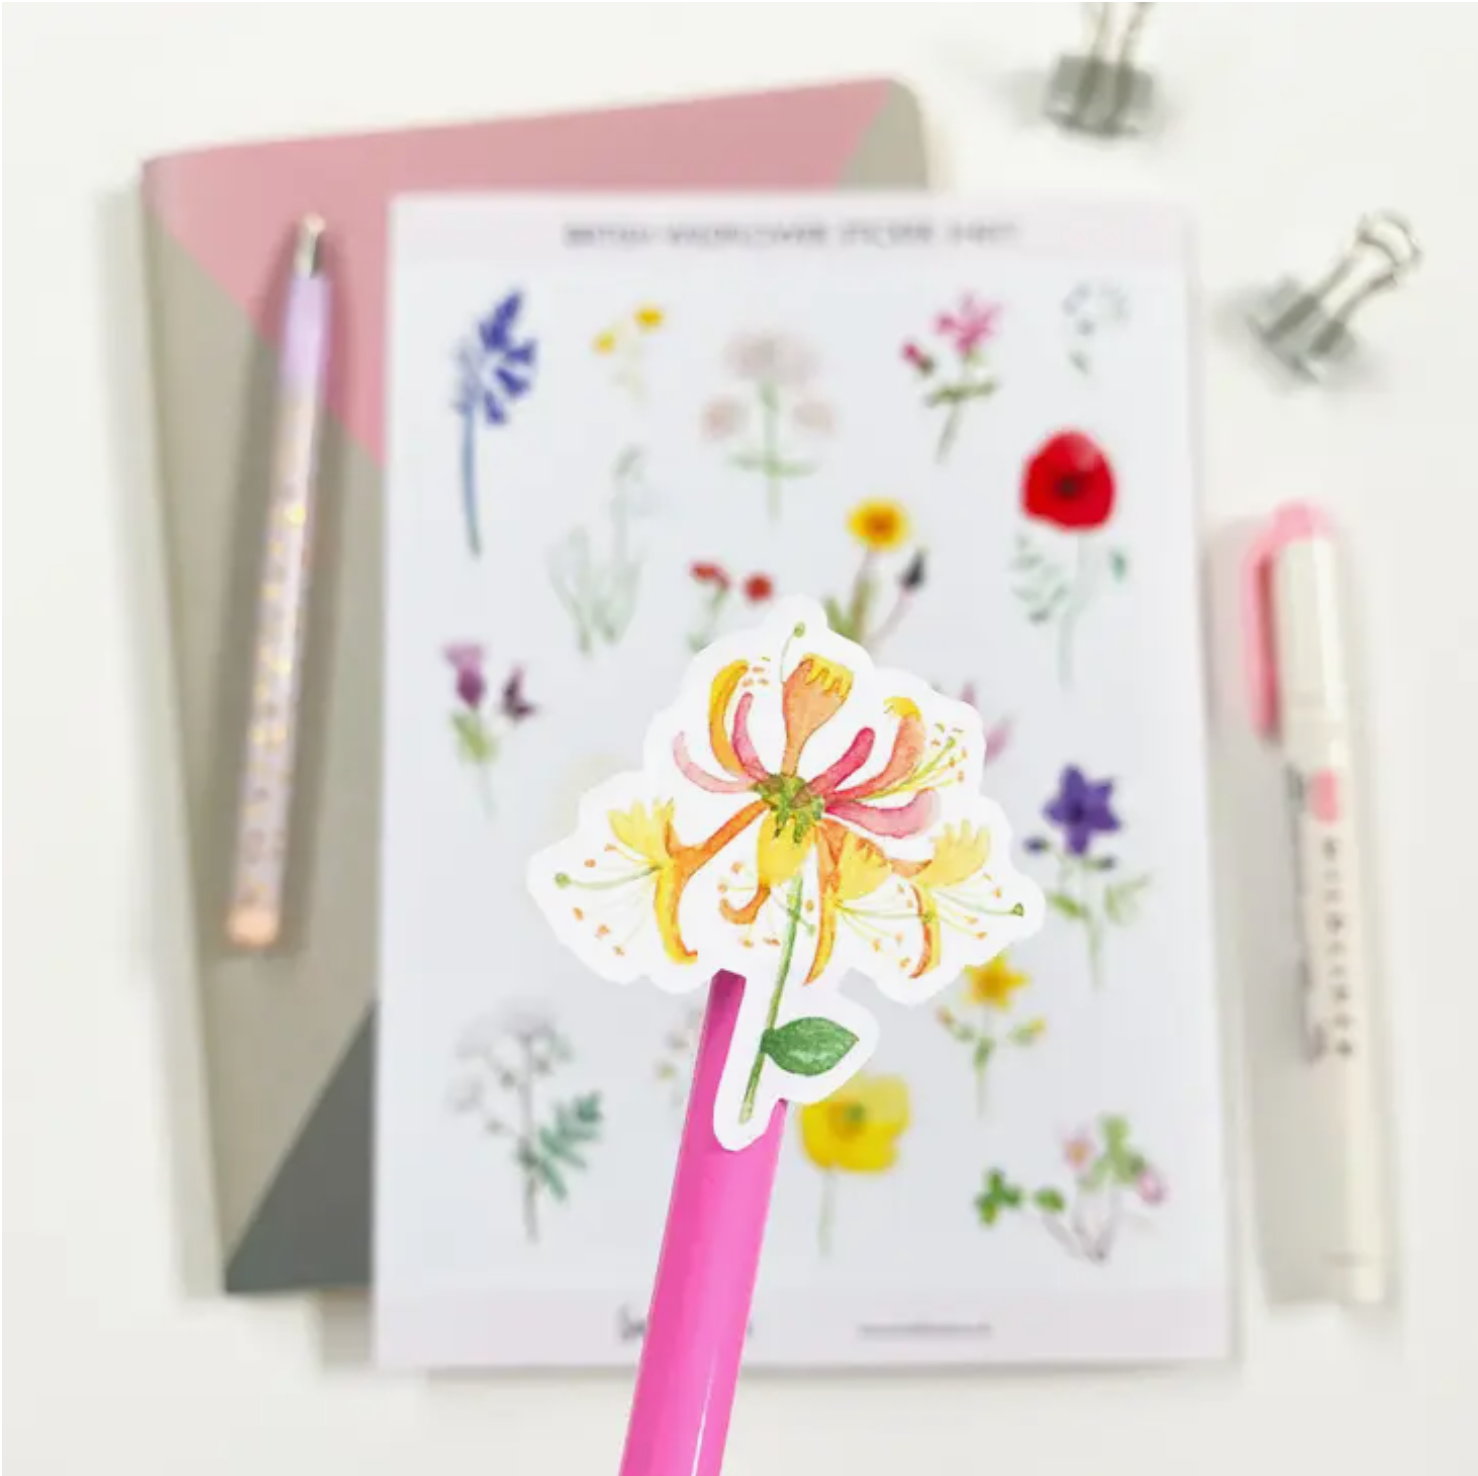 Embrace the beauty of British flora with our British Florals Sticker Sheet, featuring charming illustrations of native British flowers. Ideal for adding a touch of natural elegance and color to your crafts. These stickers are designed by Sarah Frances and sold at BBB Supplies Craft Shop.